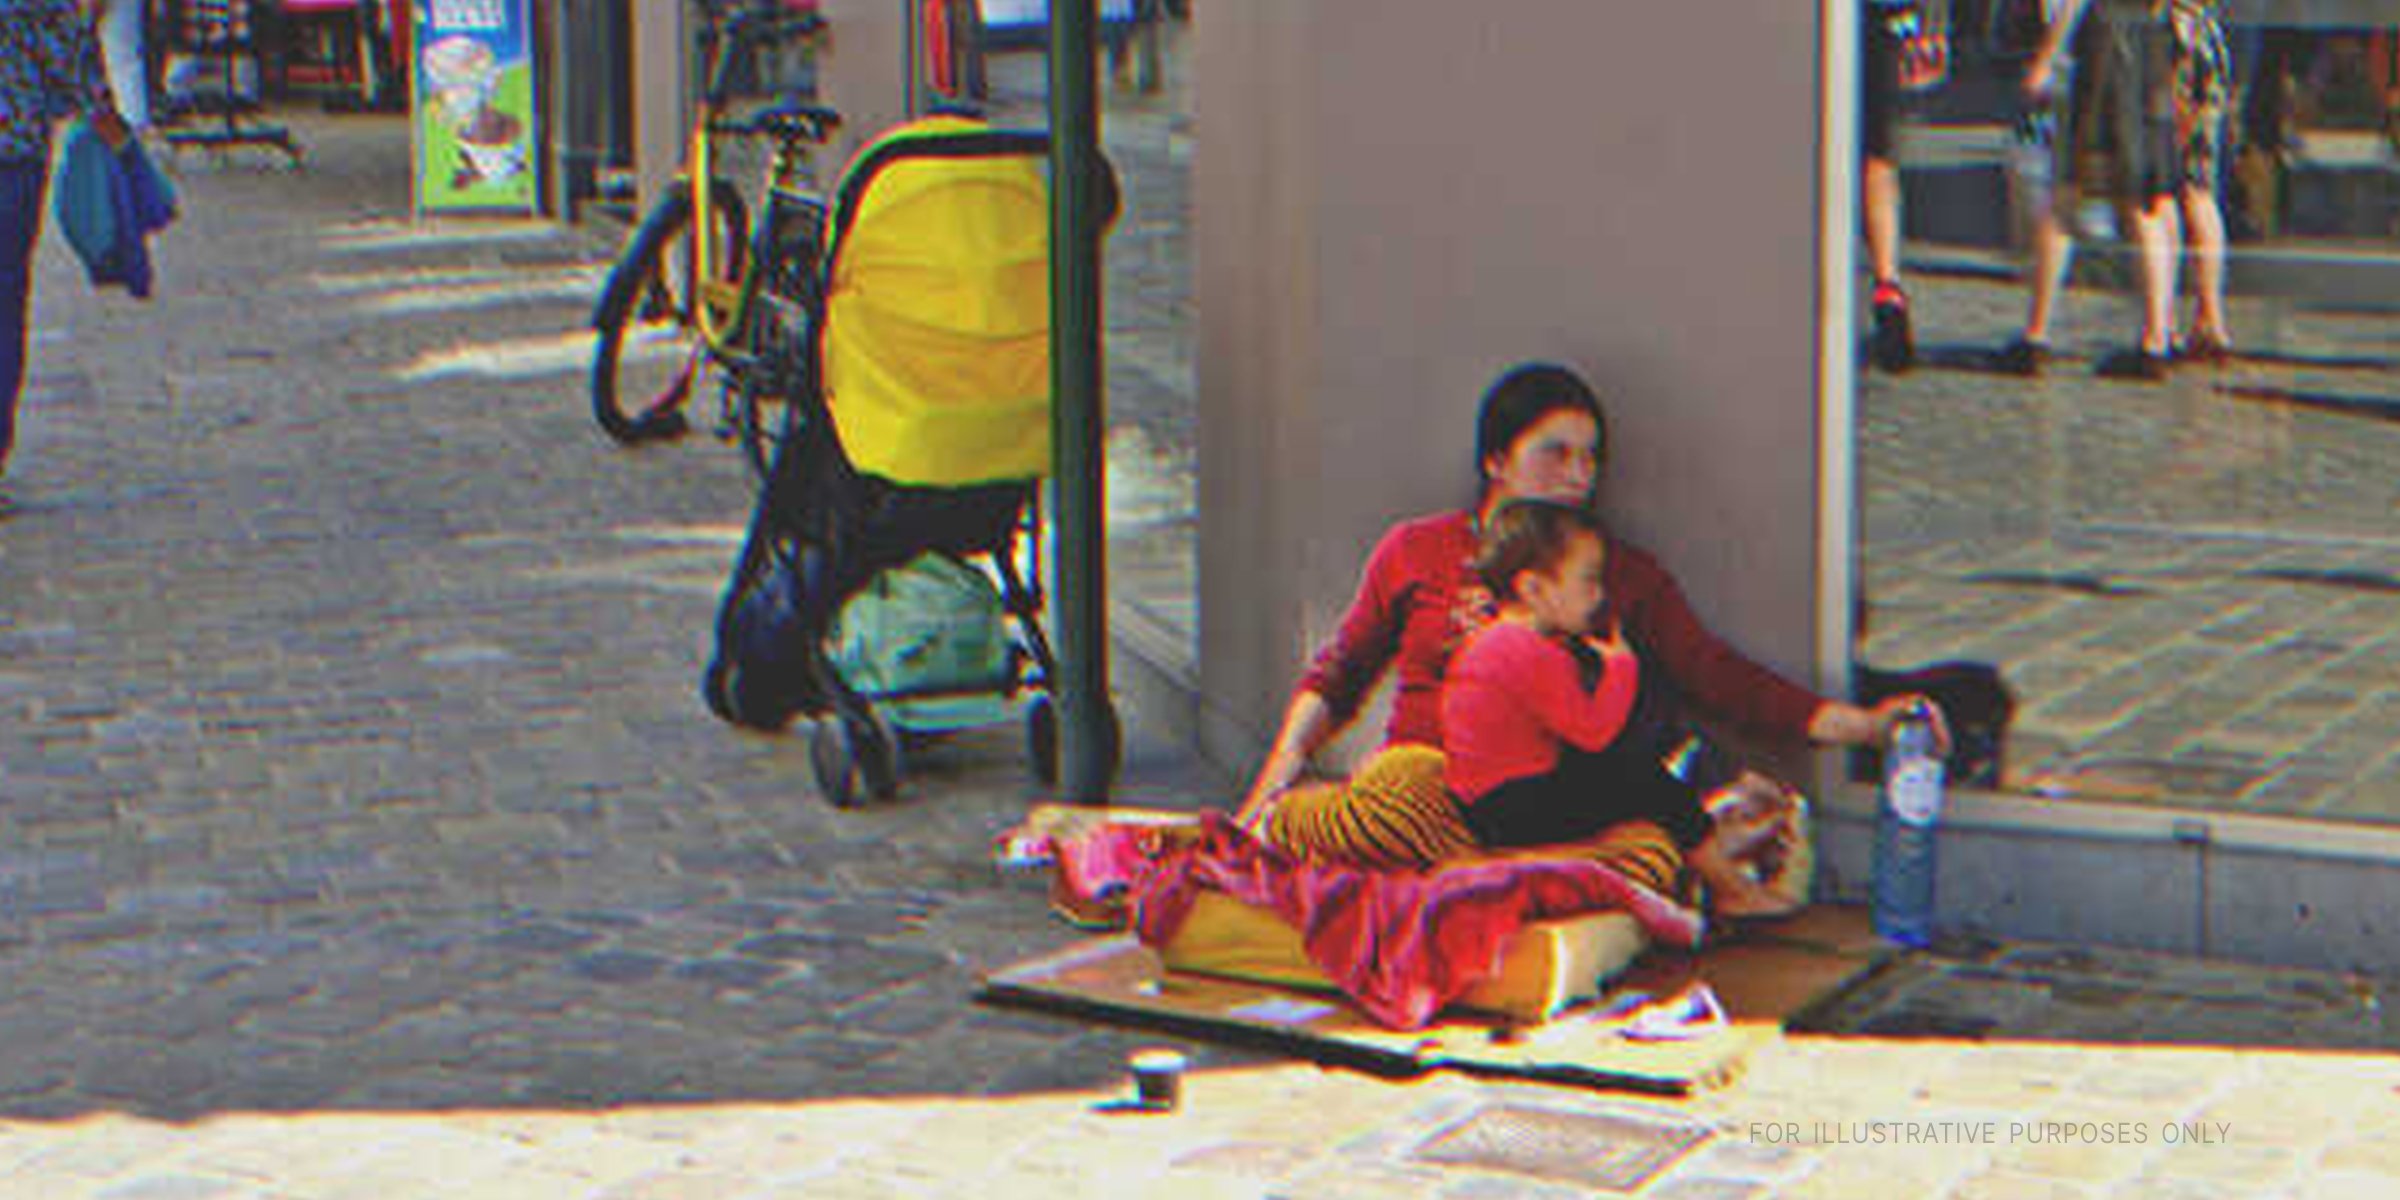 A mother and her child begging on the street | Source: Shutterstock